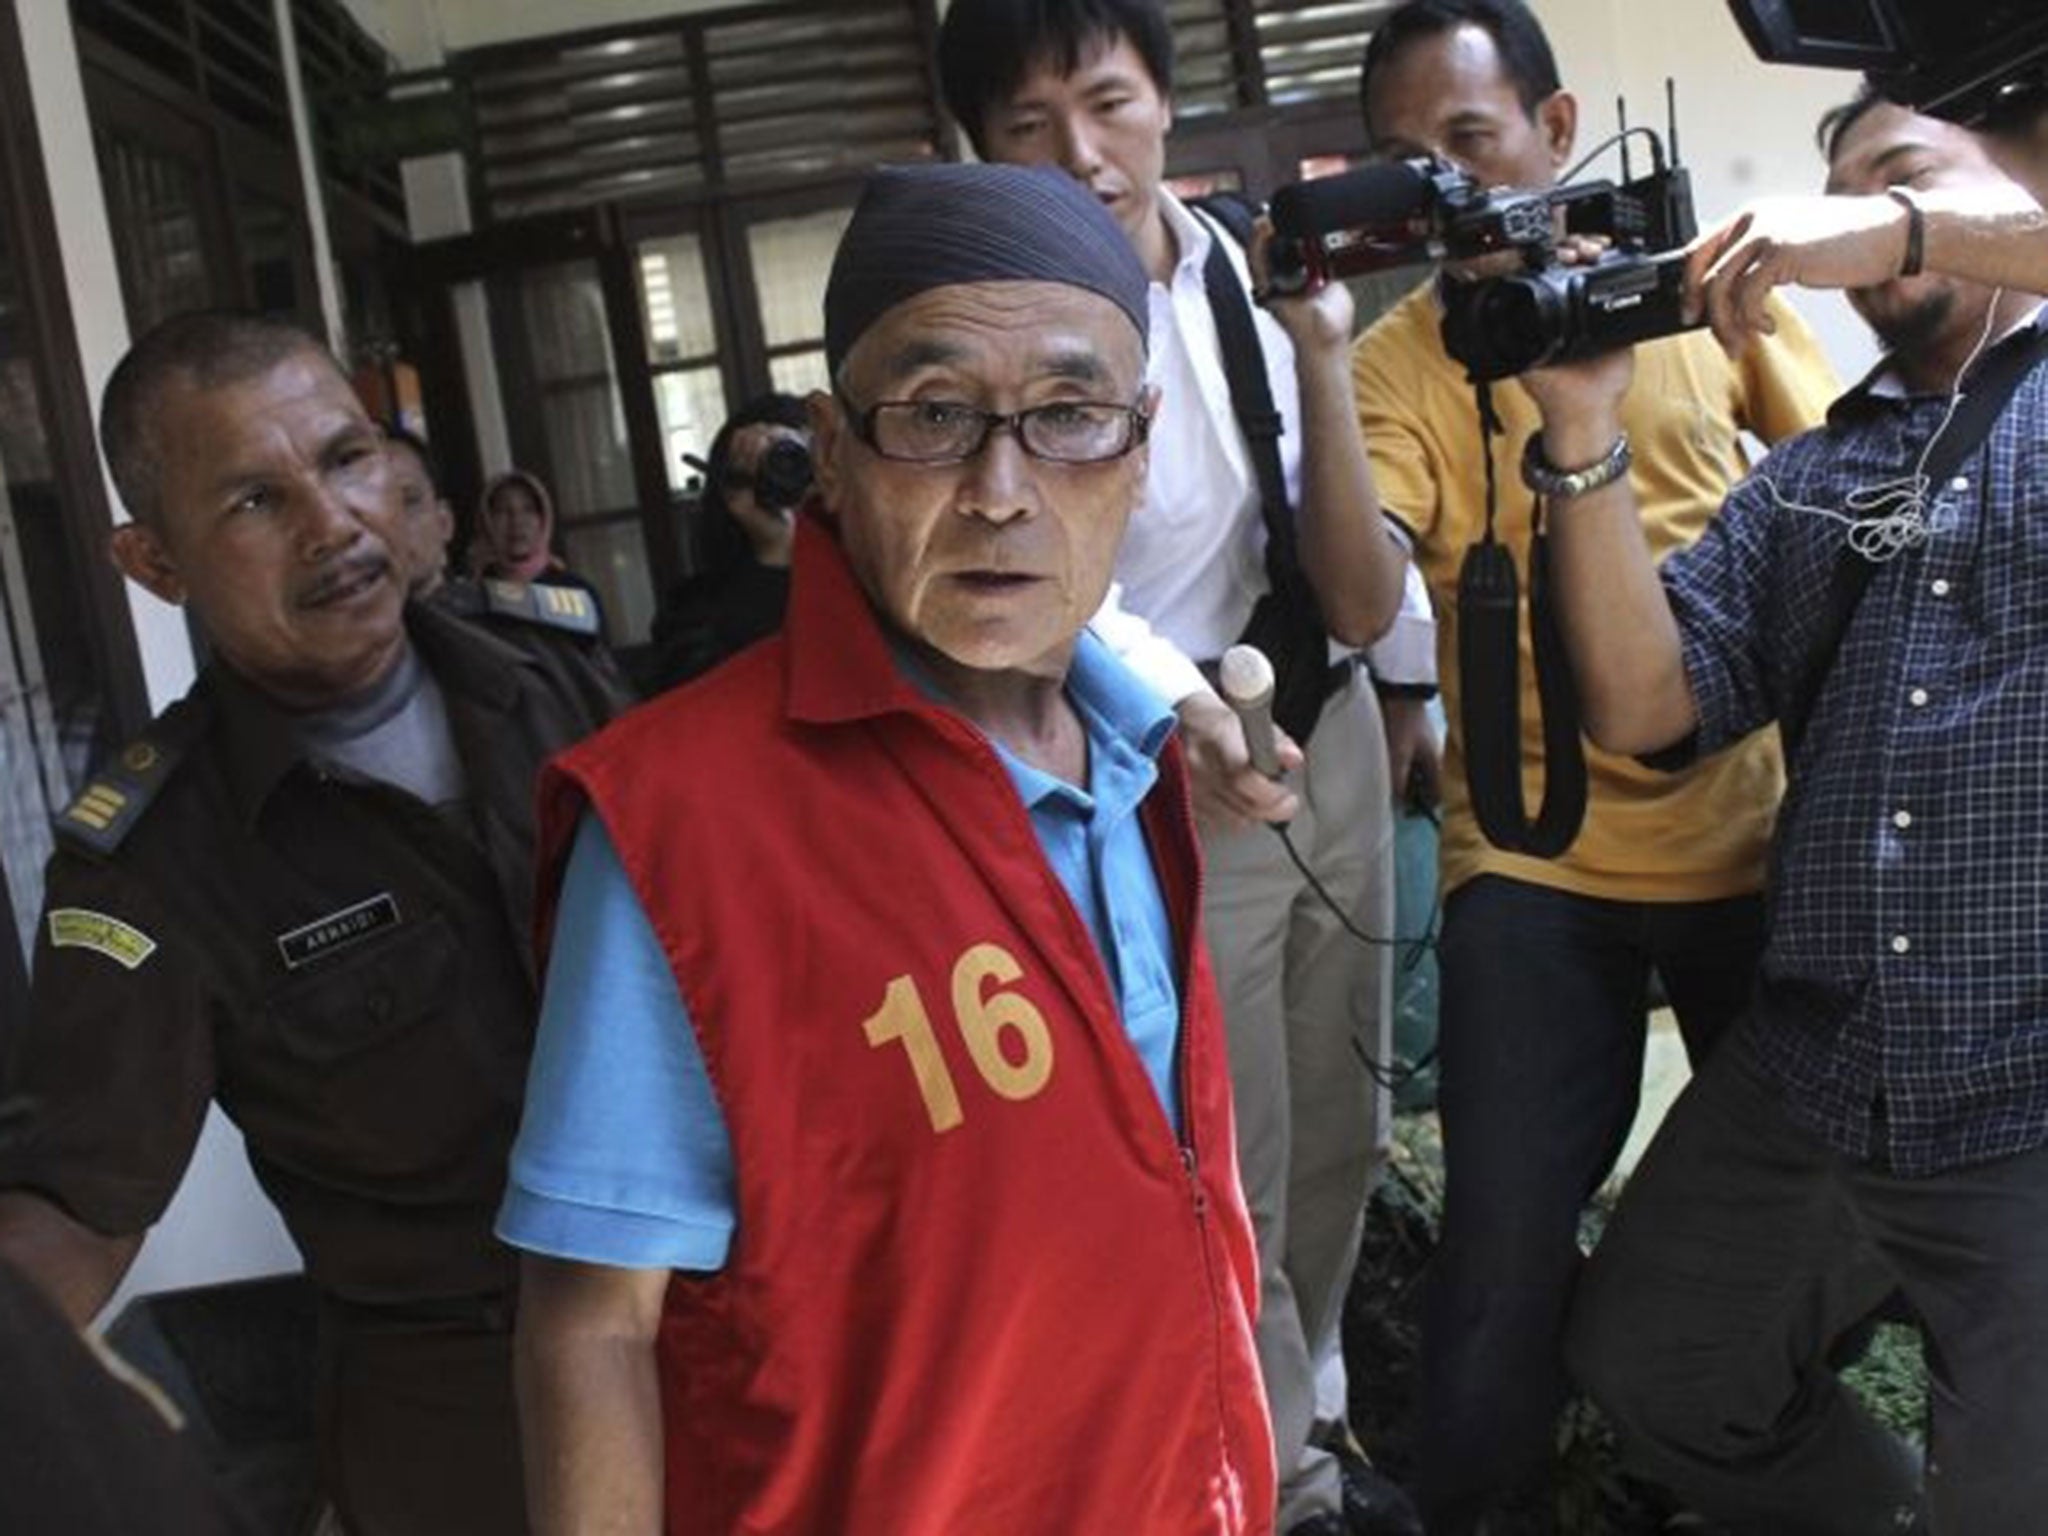 Japanese national Masaru Kawada, center, is mobbed by the media upon arrival for his sentencing hearing at the district court in Pariaman, West Sumatra, Indonesia